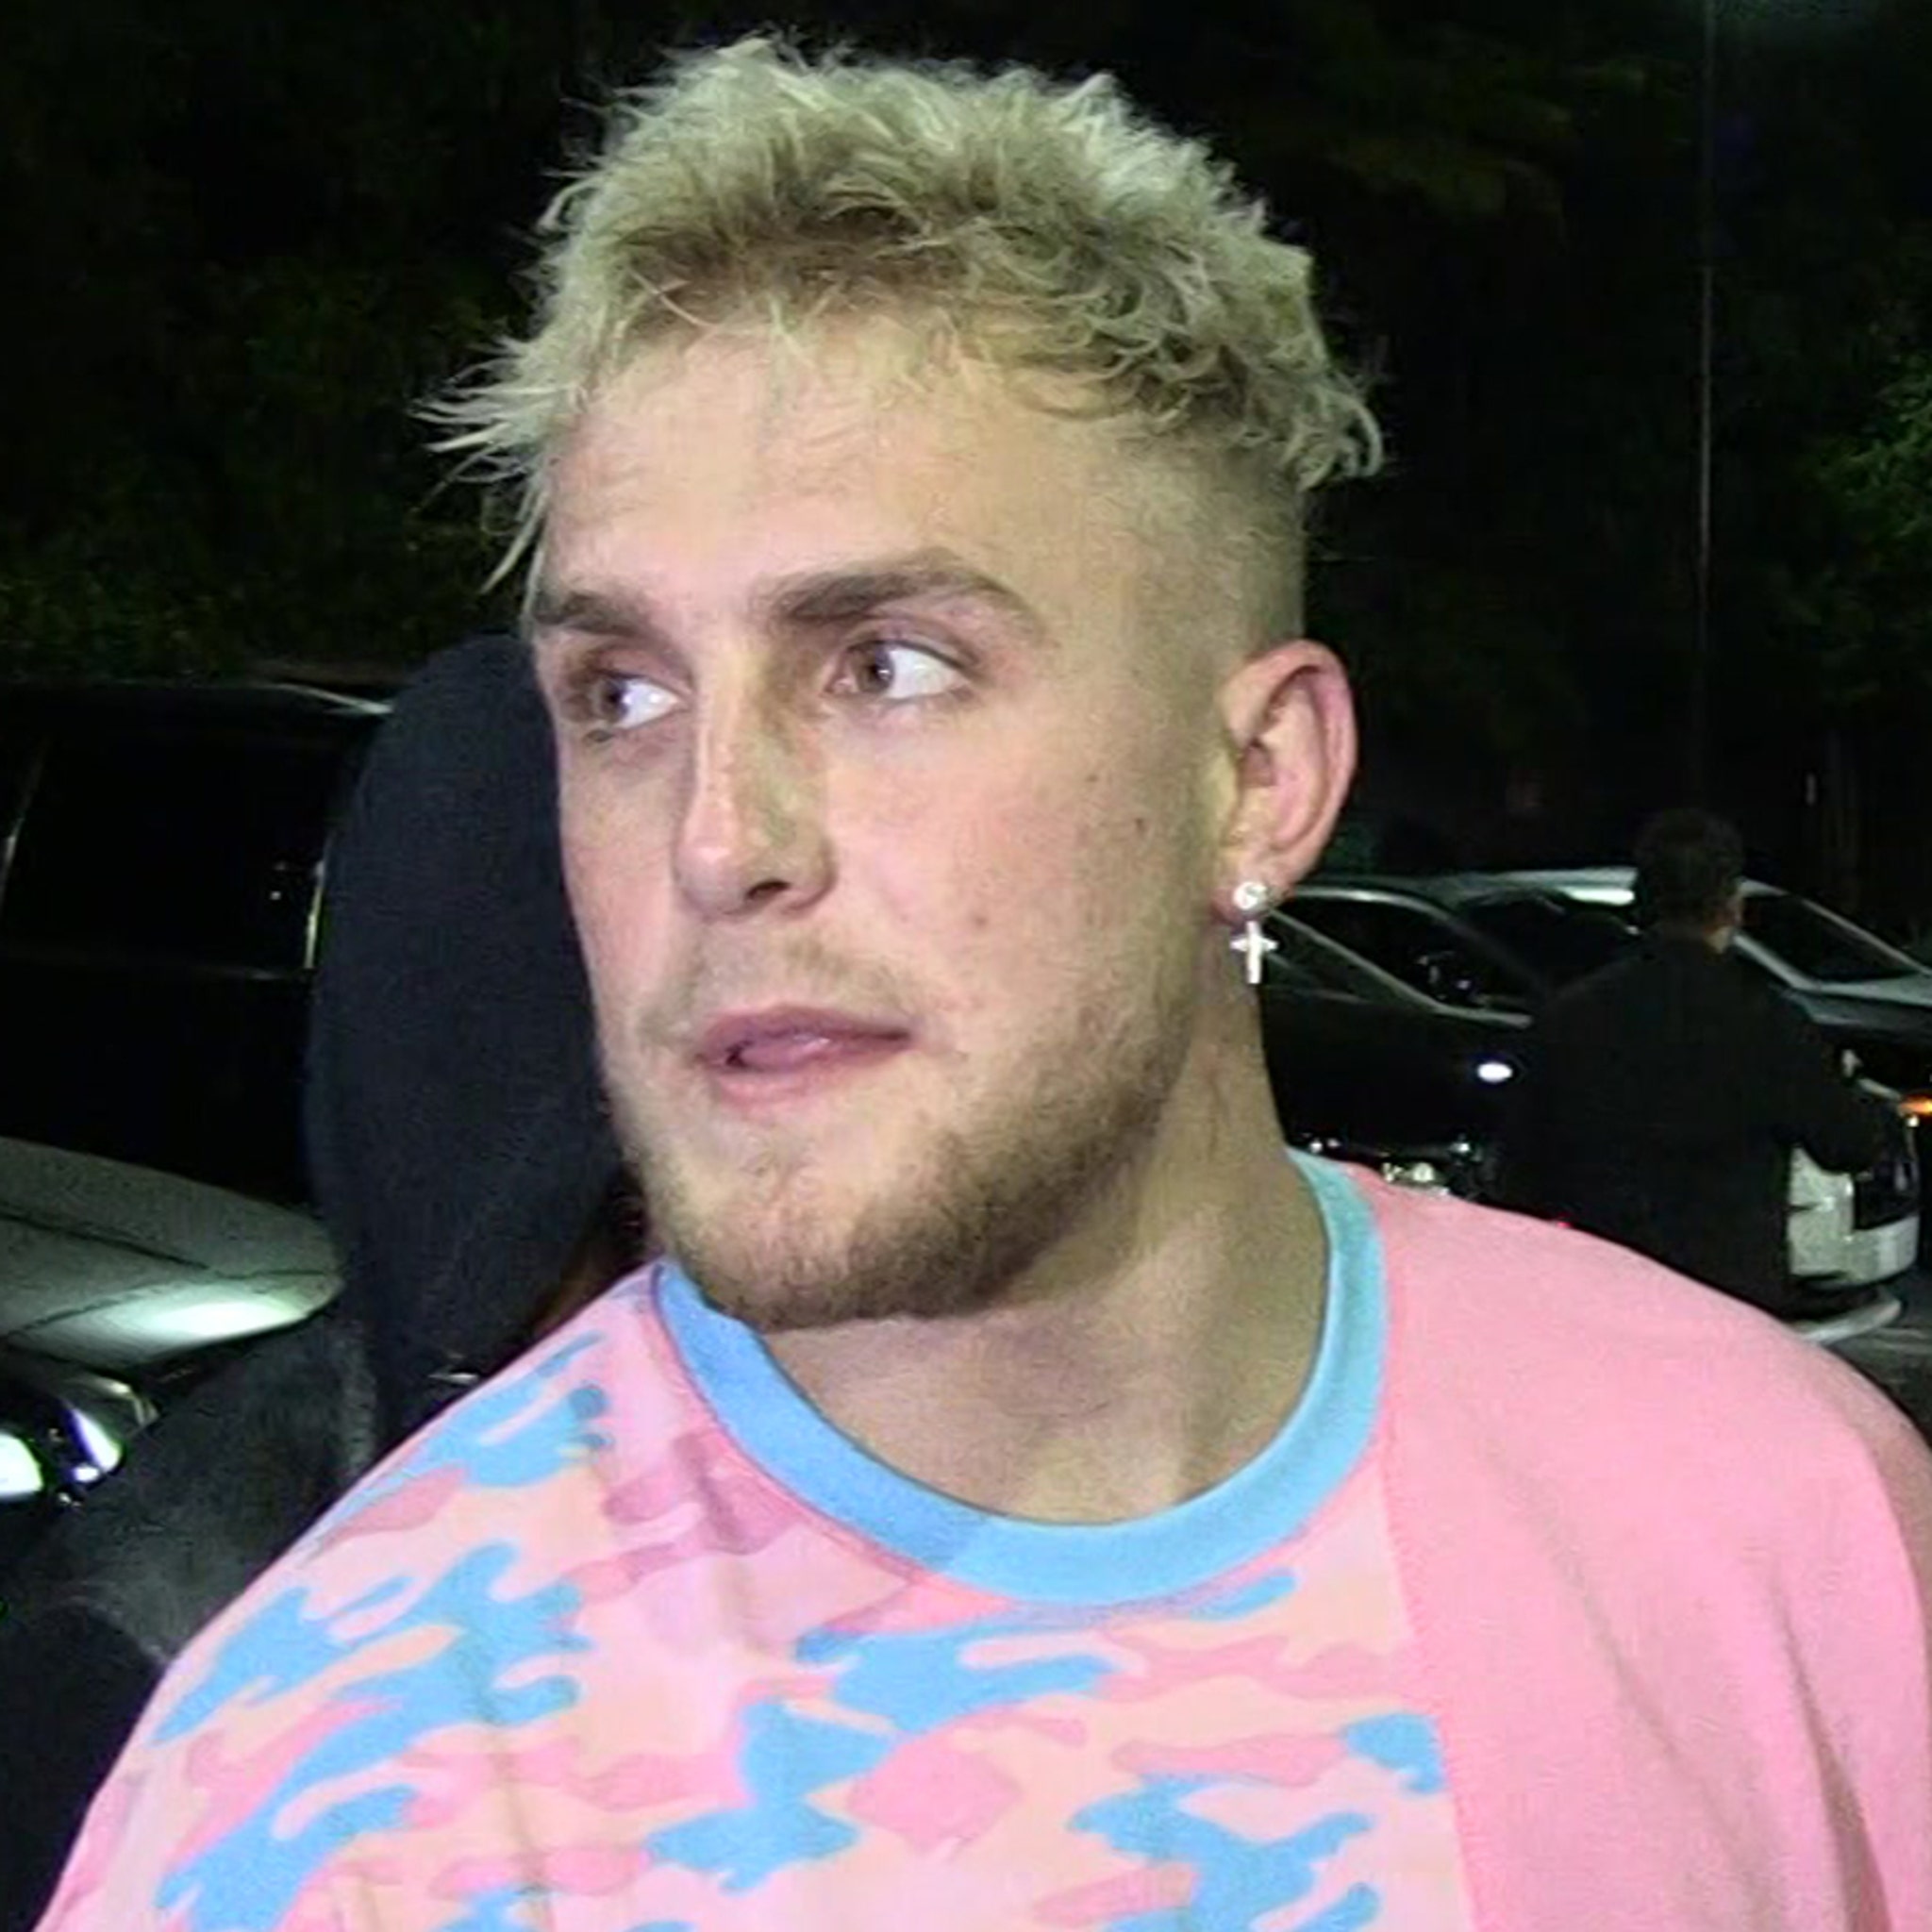 How To Style Your Hair Like Jake Paul - Jake Paul ...